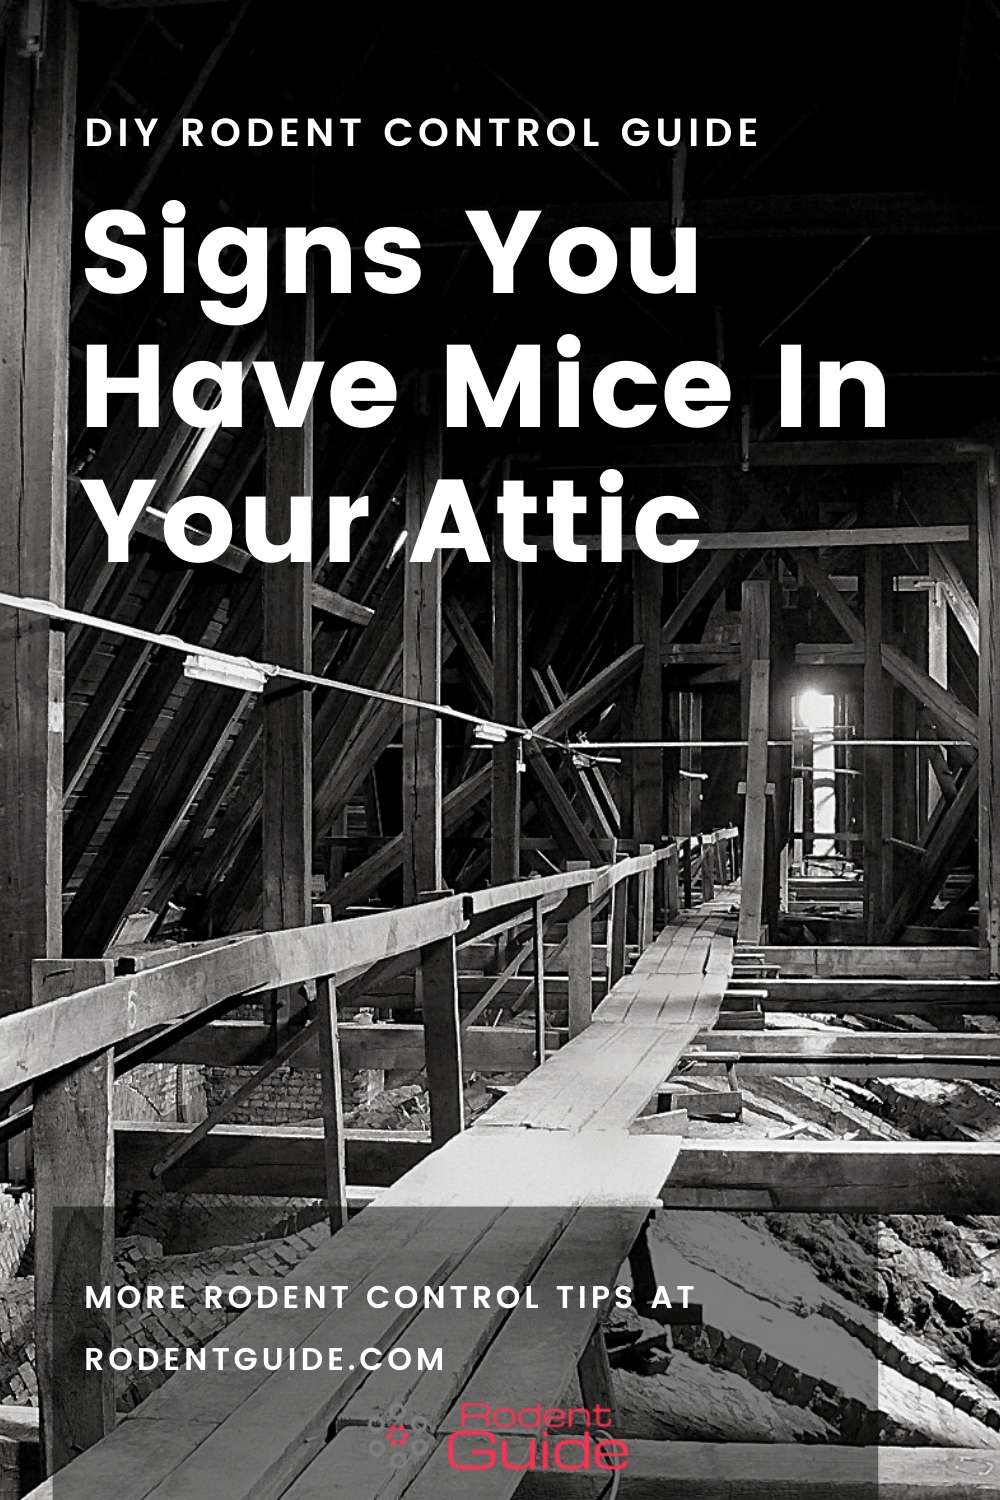 Signs You Have Mice In Your Attic